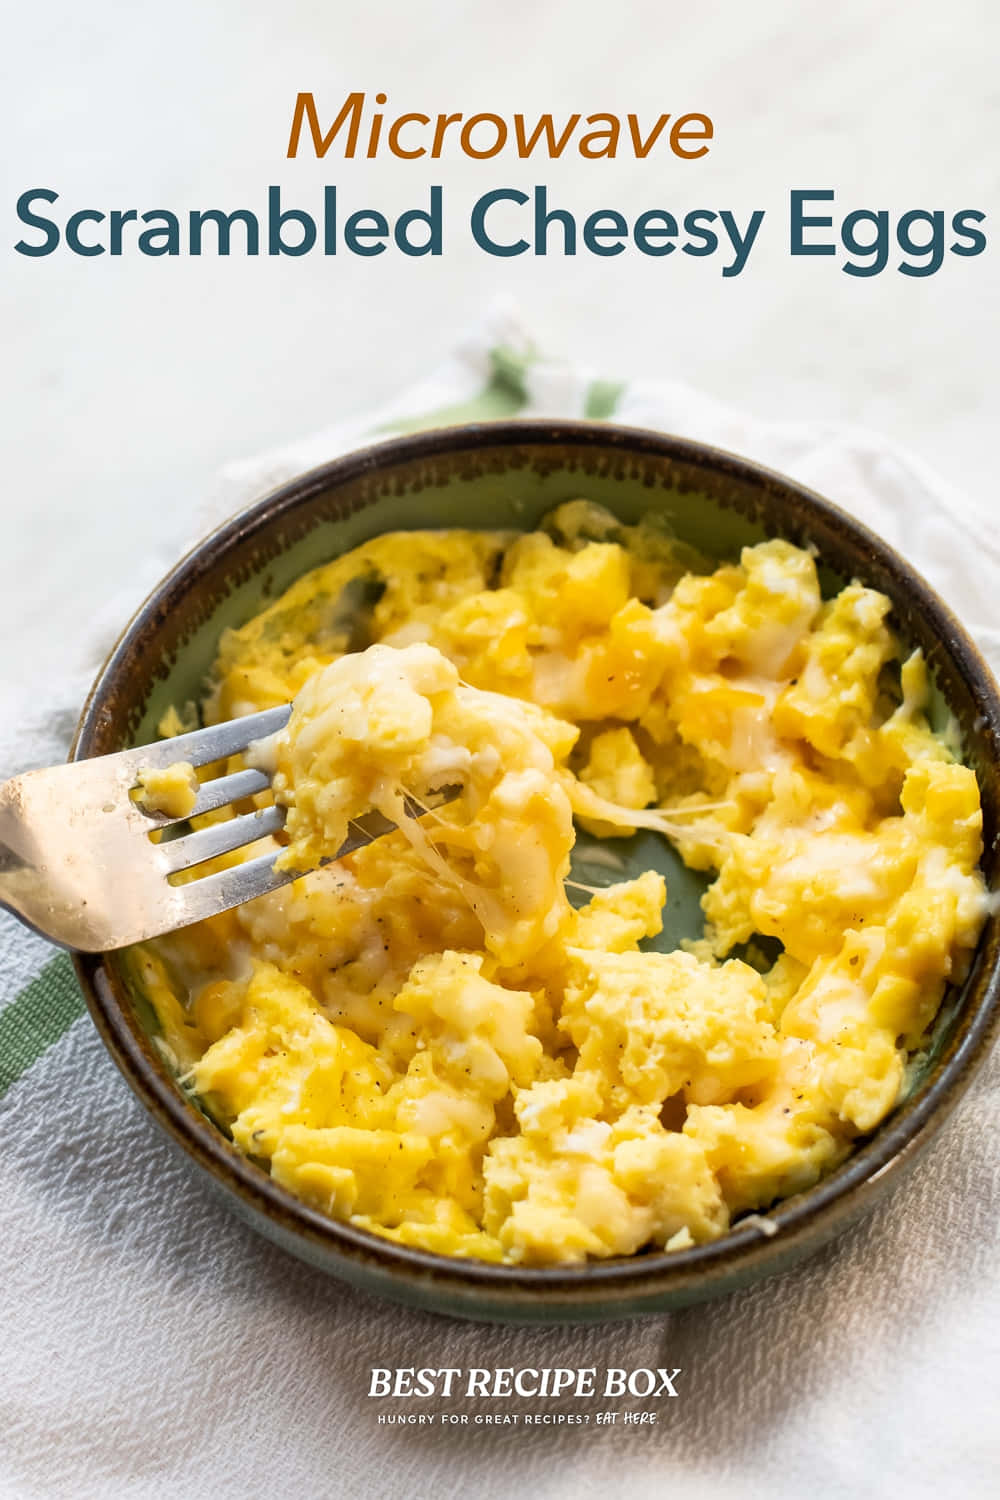 Perfectly cooked scrambled eggs - Enjoy!